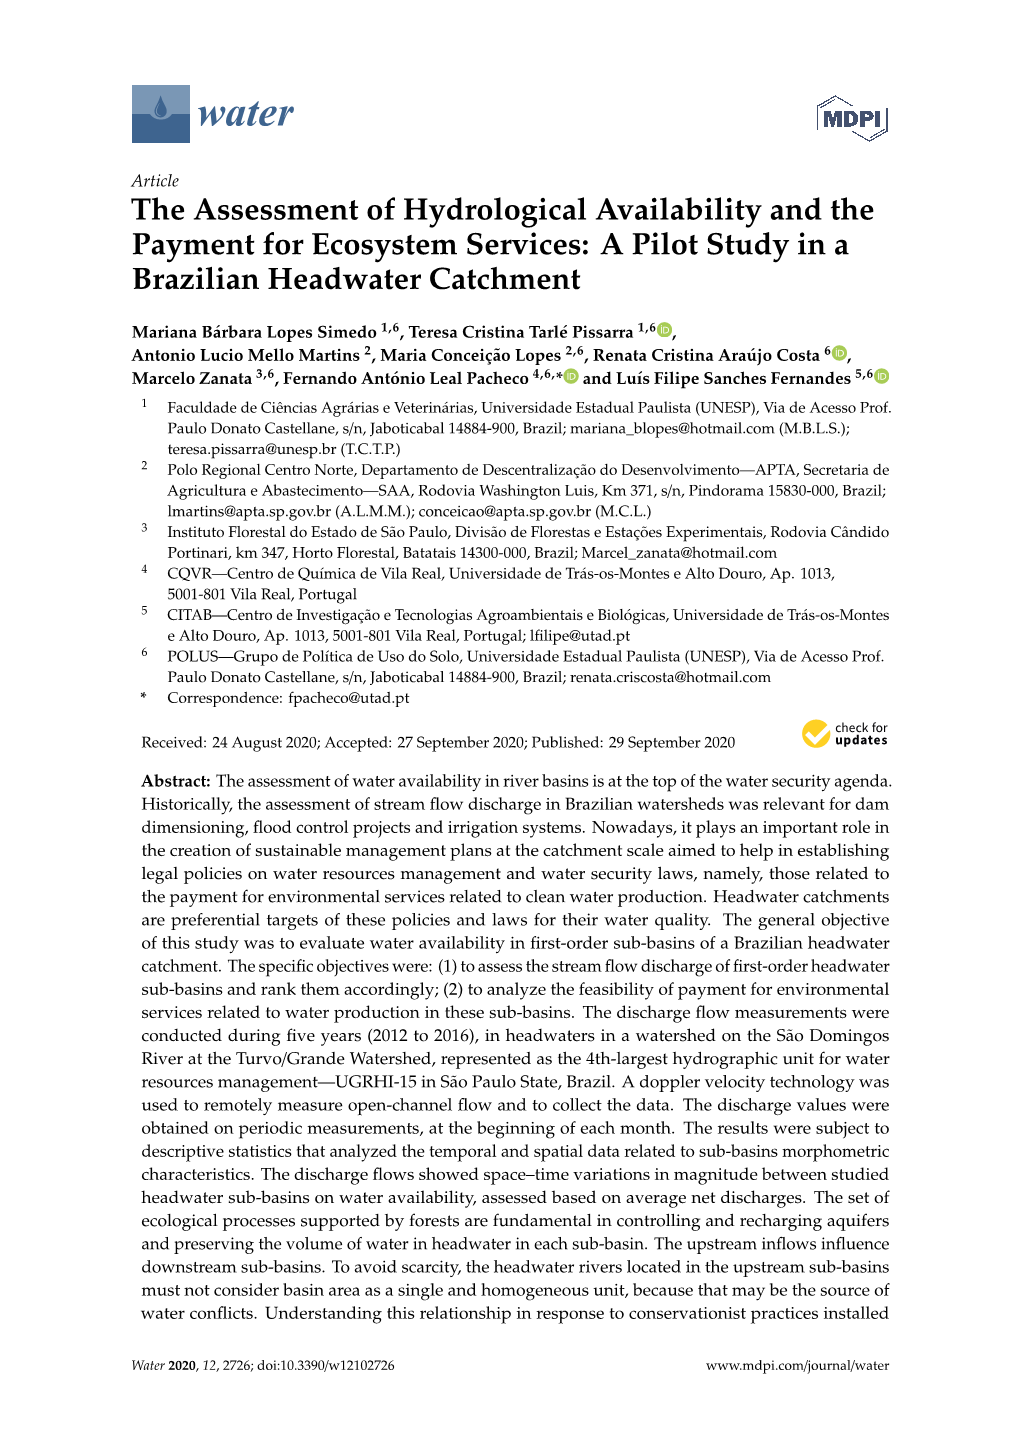 The Assessment of Hydrological Availability and the Payment for Ecosystem Services: a Pilot Study in a Brazilian Headwater Catchment